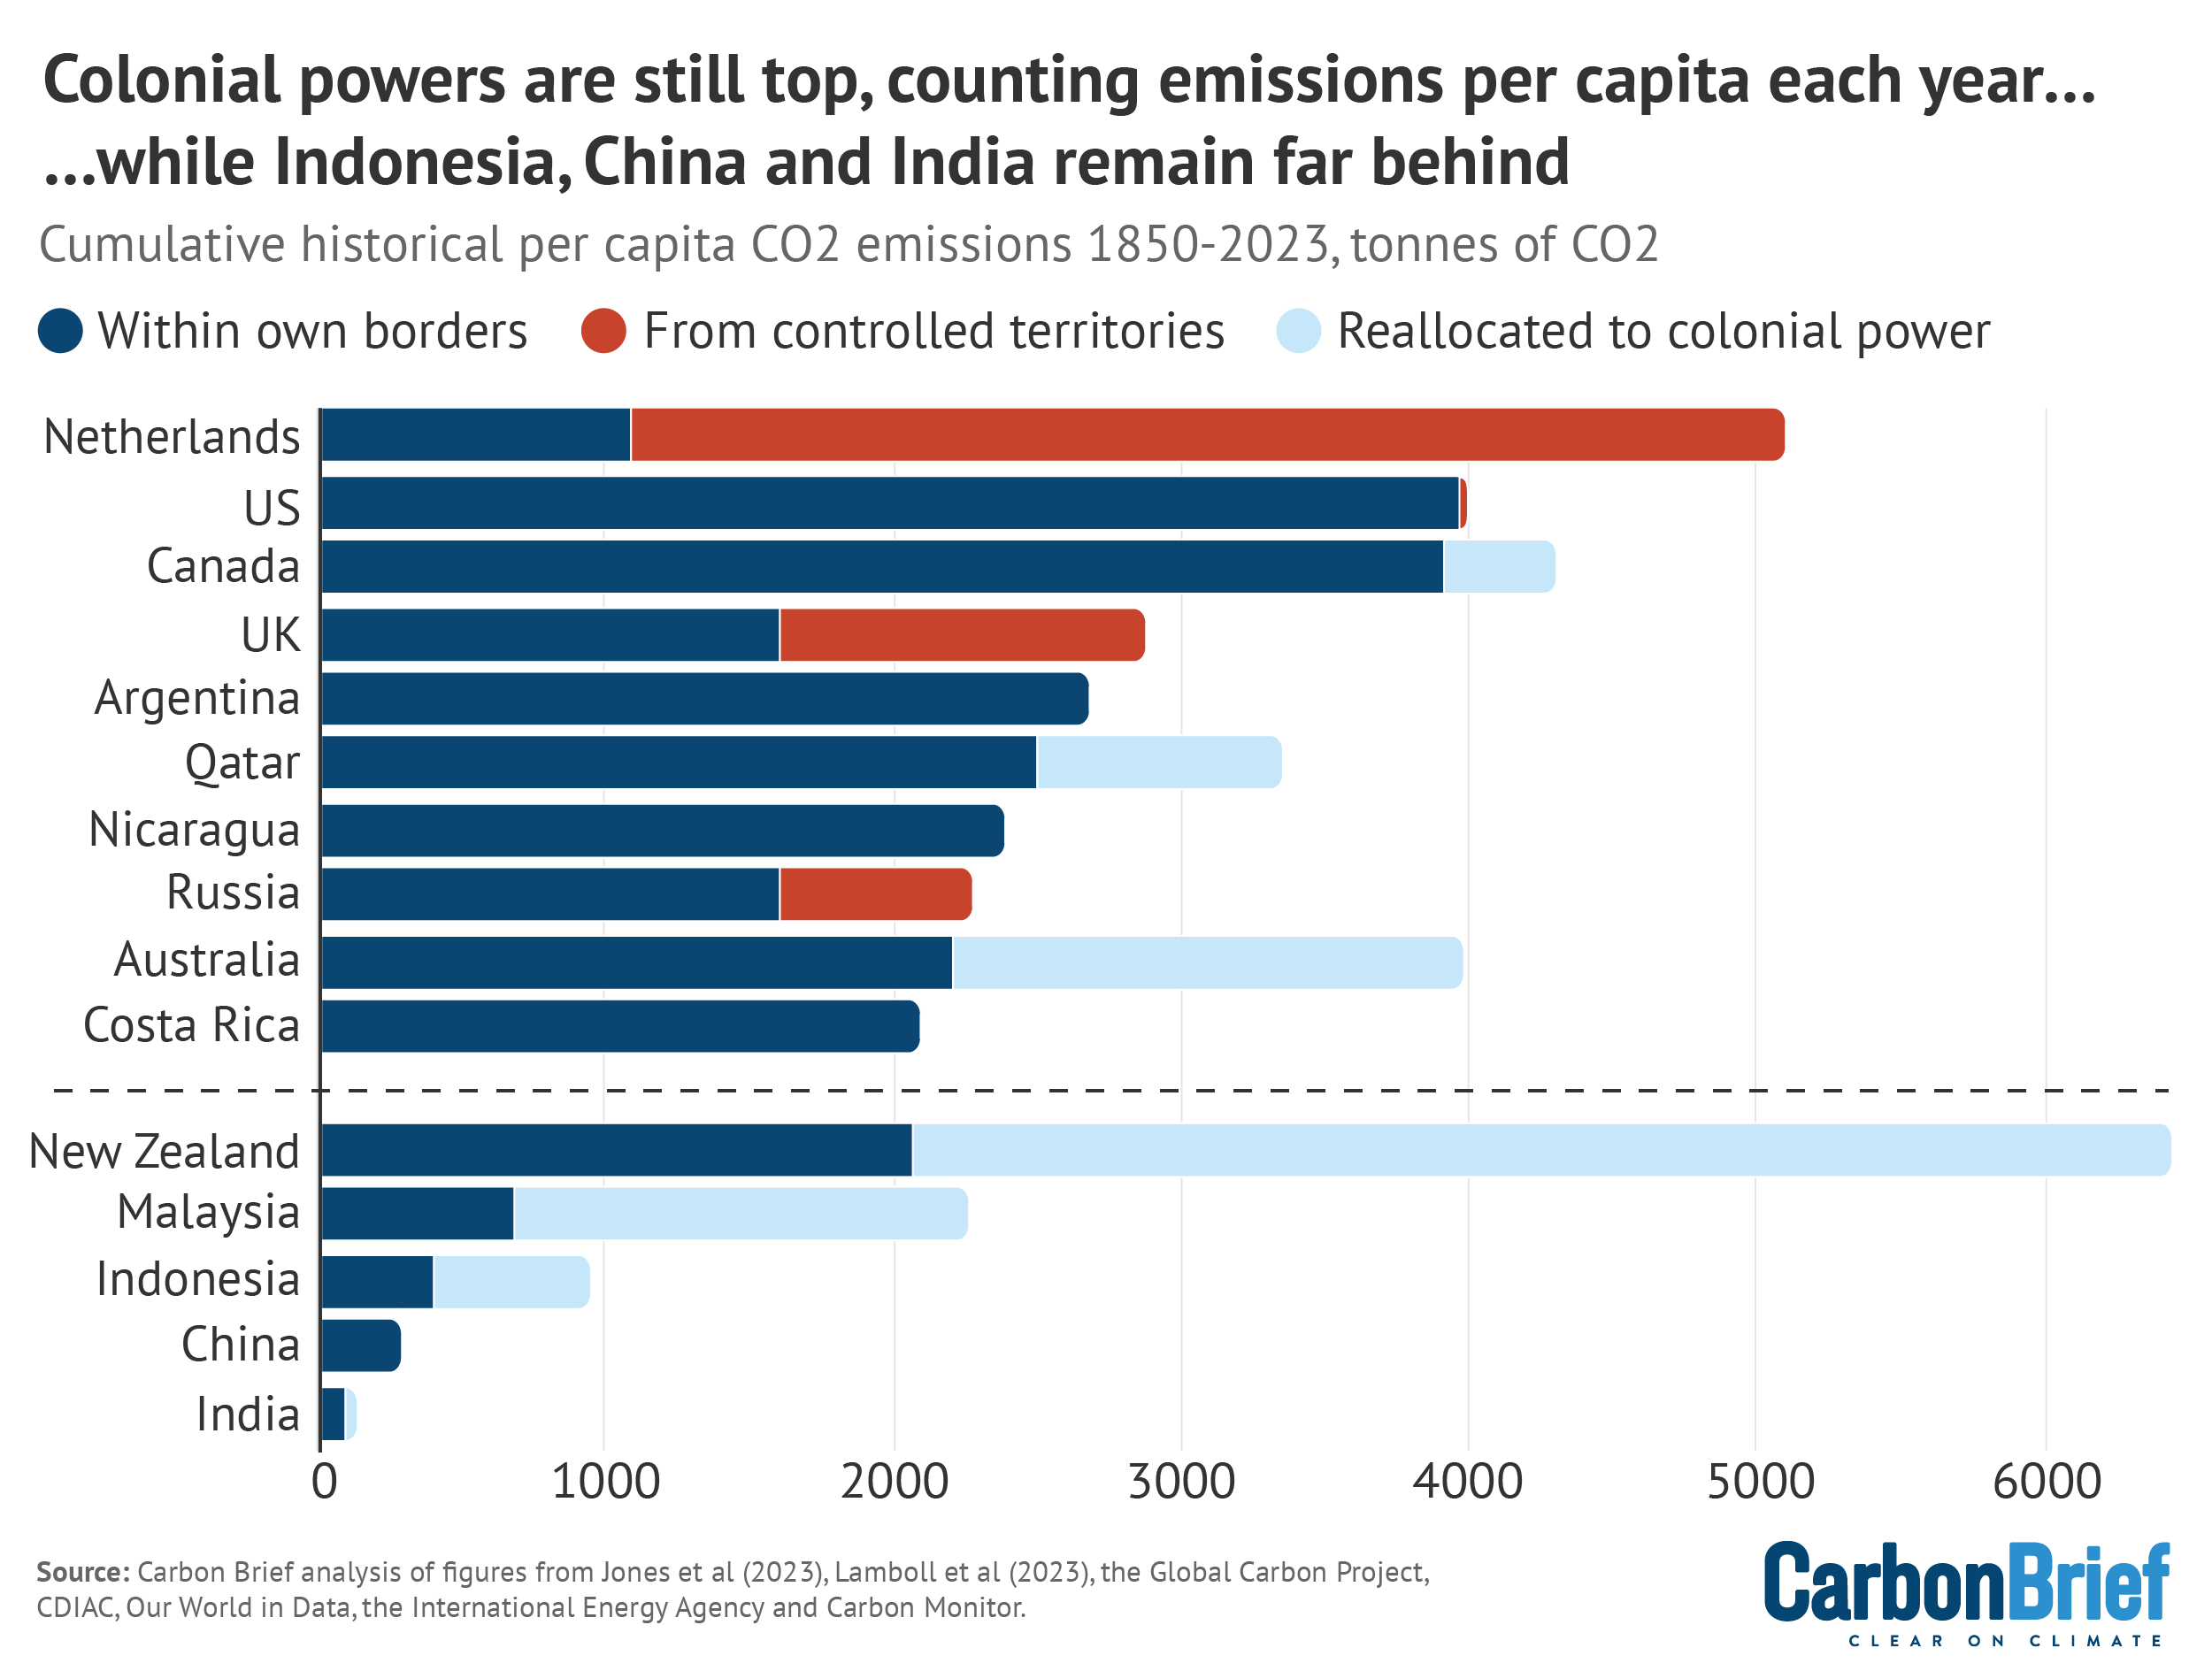 Colonial powers are still top, counting emissions per capita each year...while Indonesia, China and India remain far behind